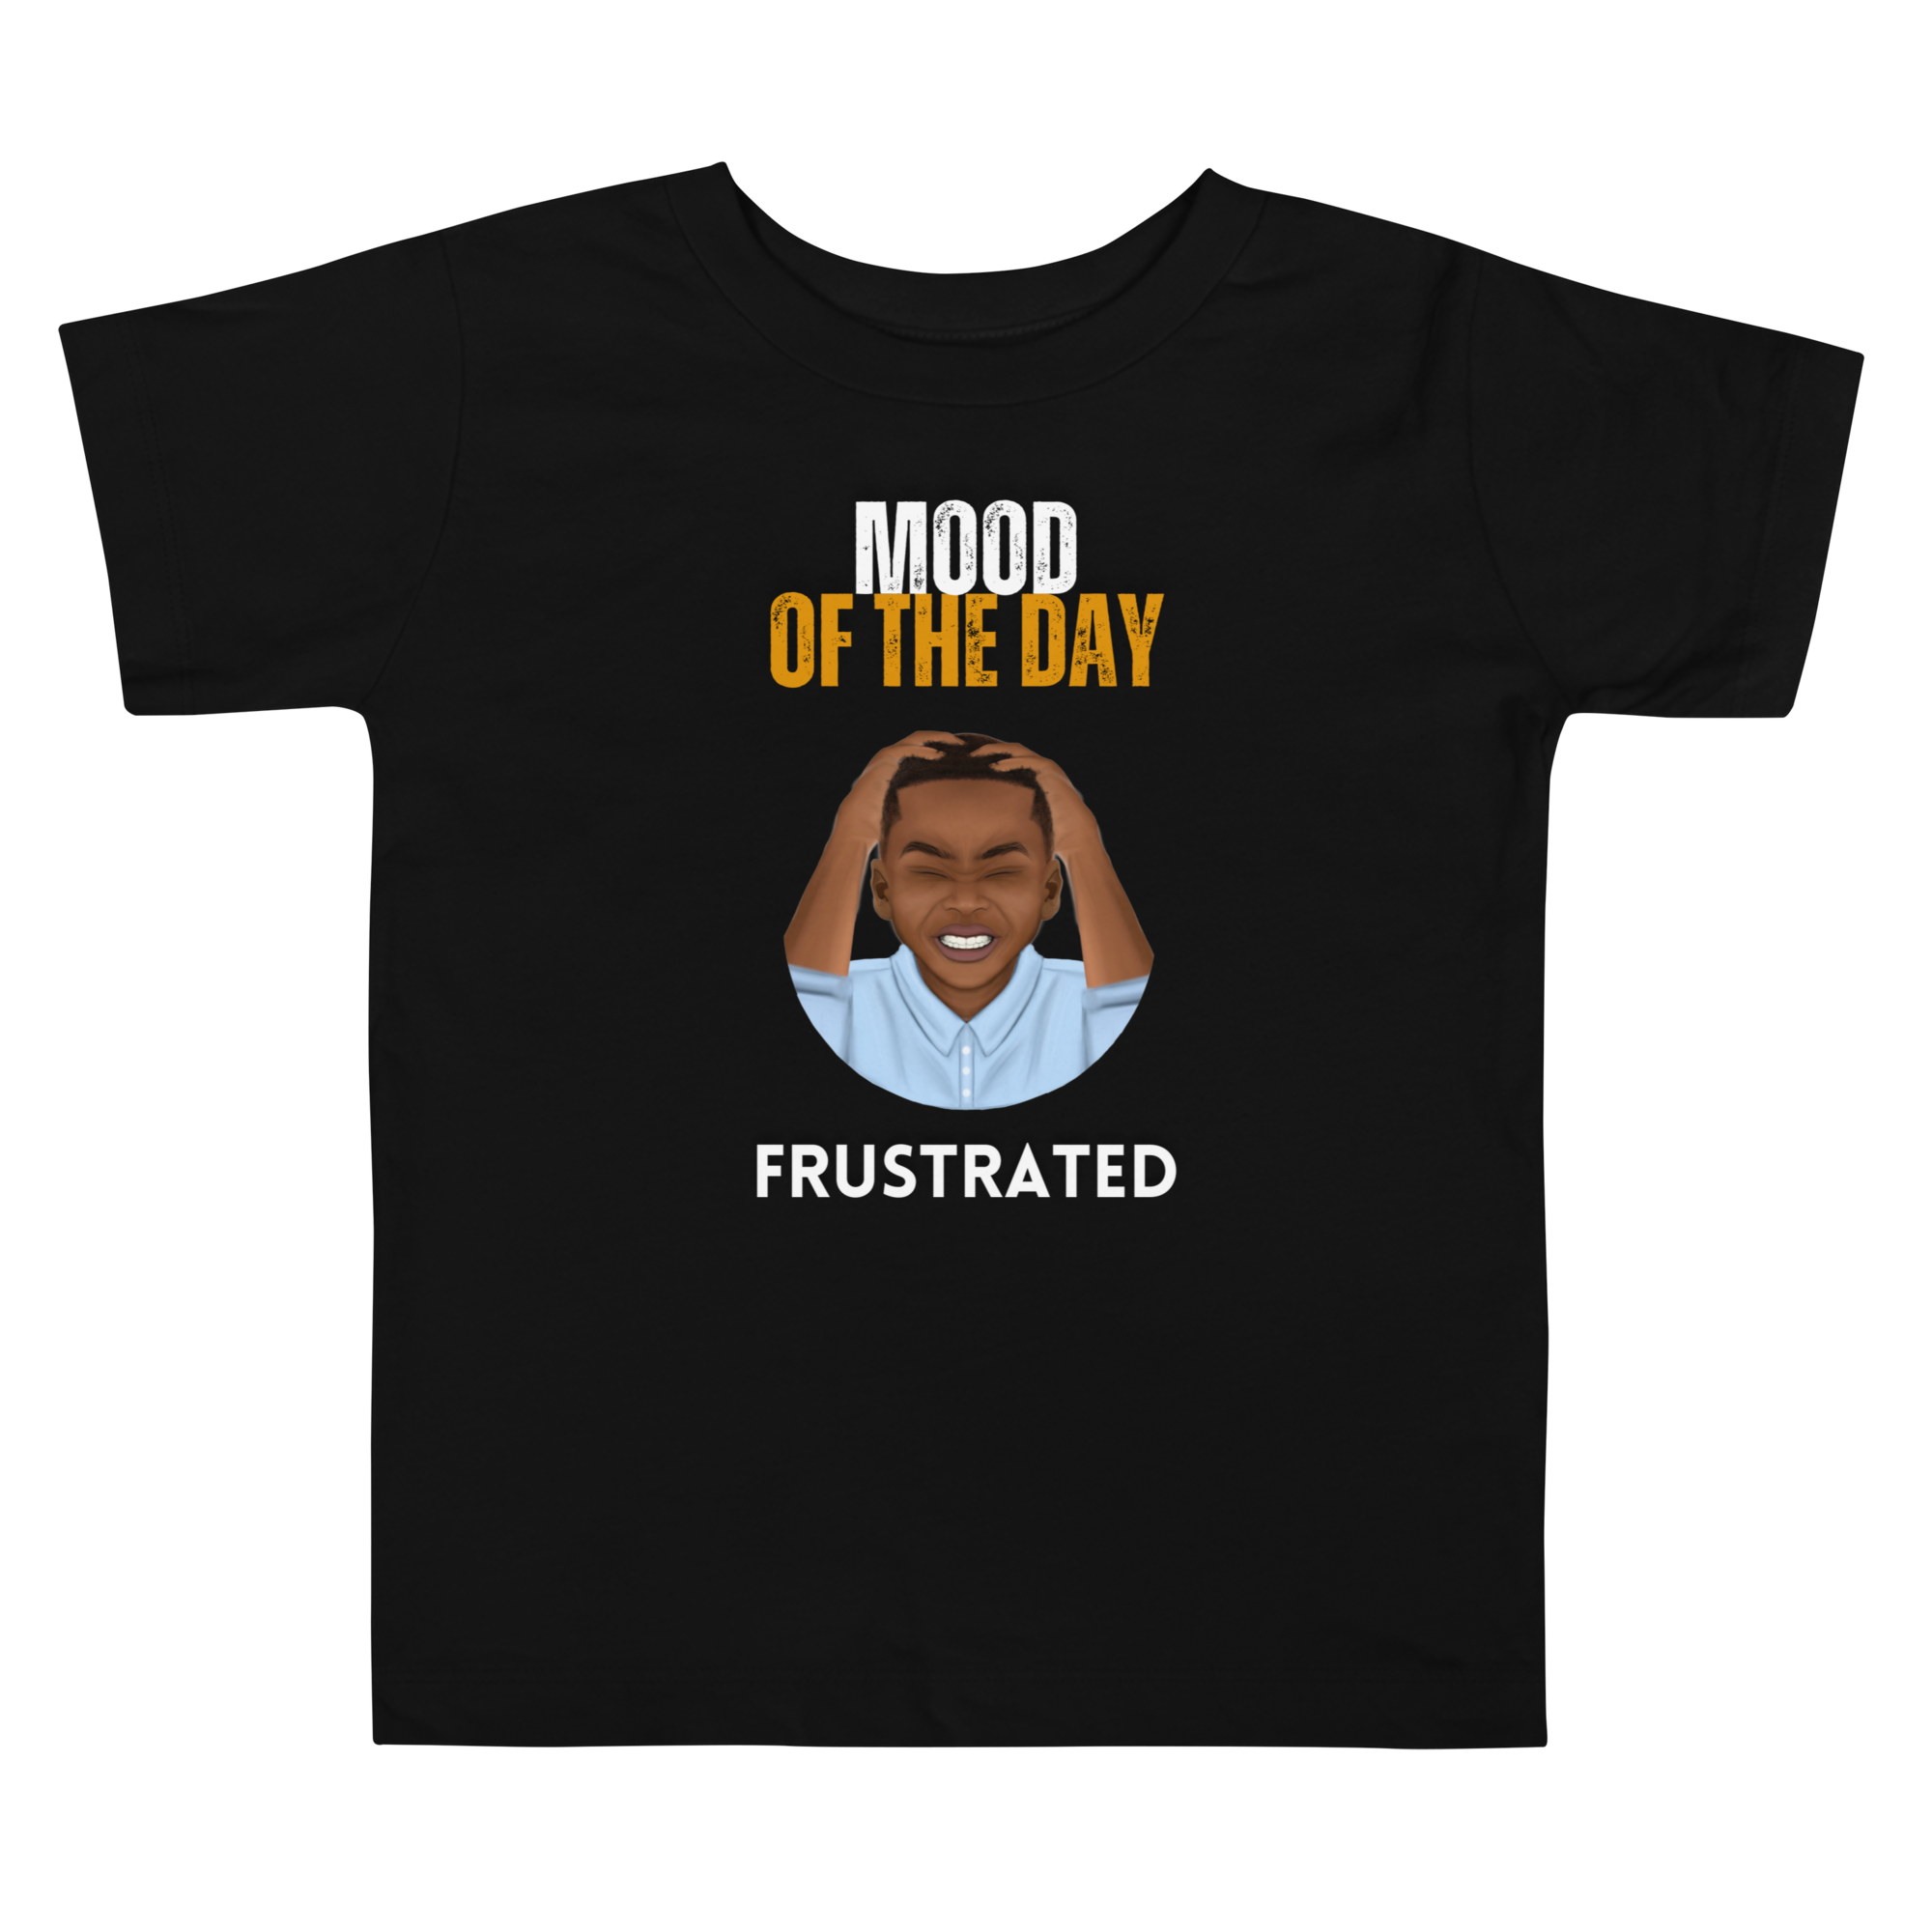 Toddler Mood of the Day T-shirt - Frustrated